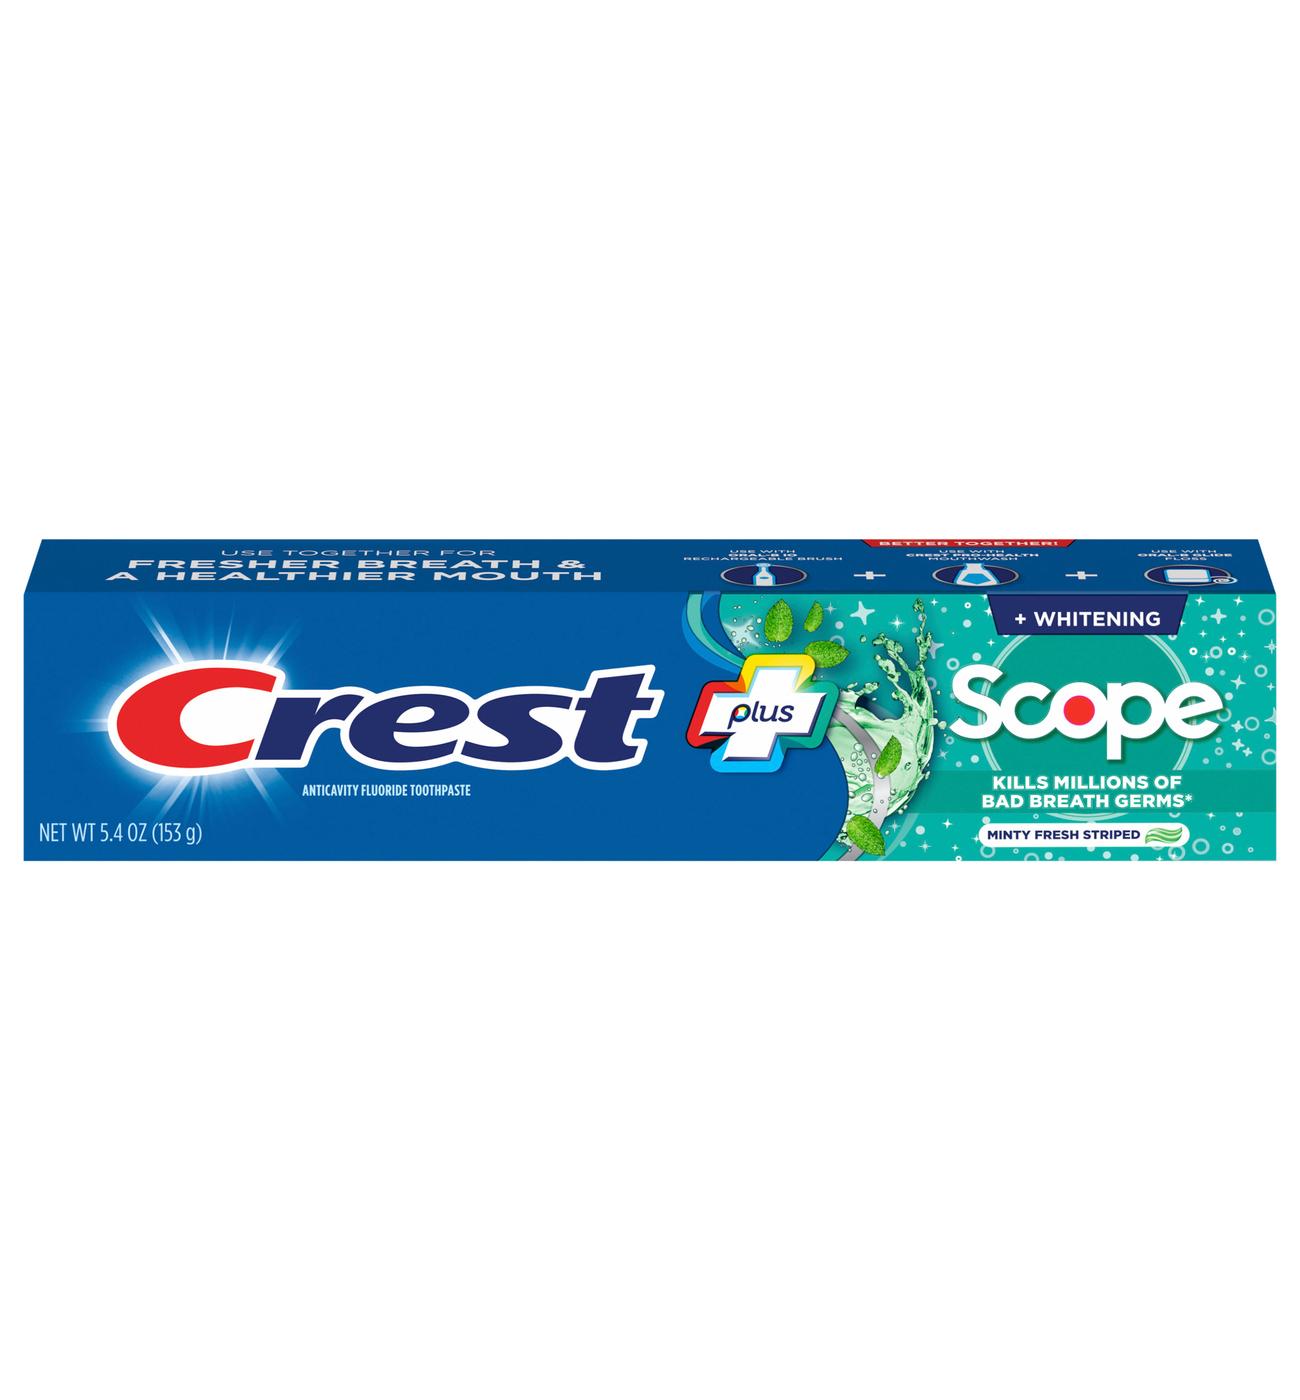 Crest Complete + Scope Whitening Toothpaste - Minty Fresh Striped; image 1 of 10